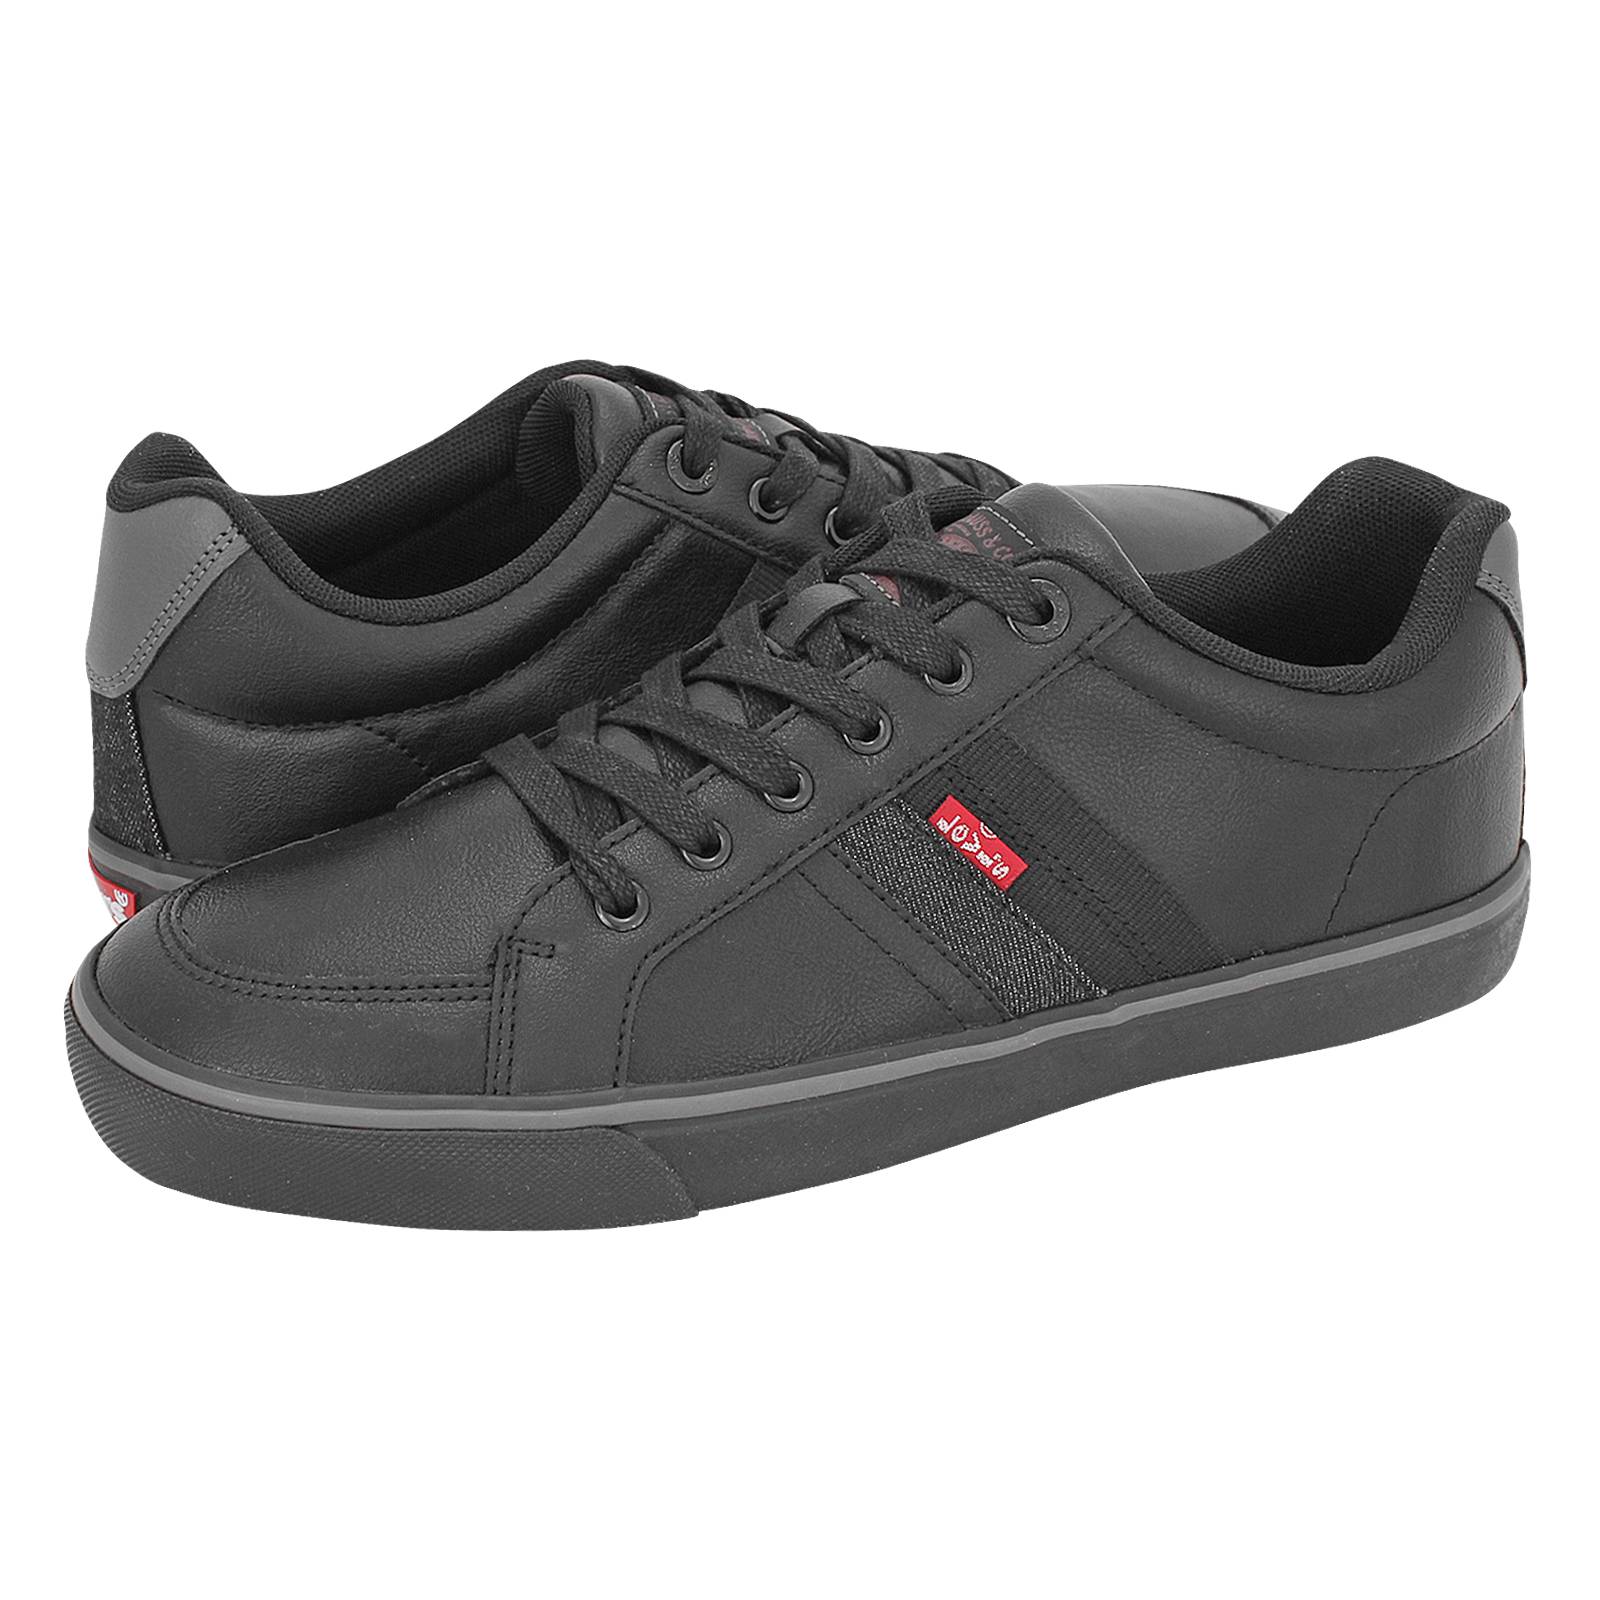 Turner - Levi's Men's casual shoes made of synthetic leather and fabric -  Gianna Kazakou Online